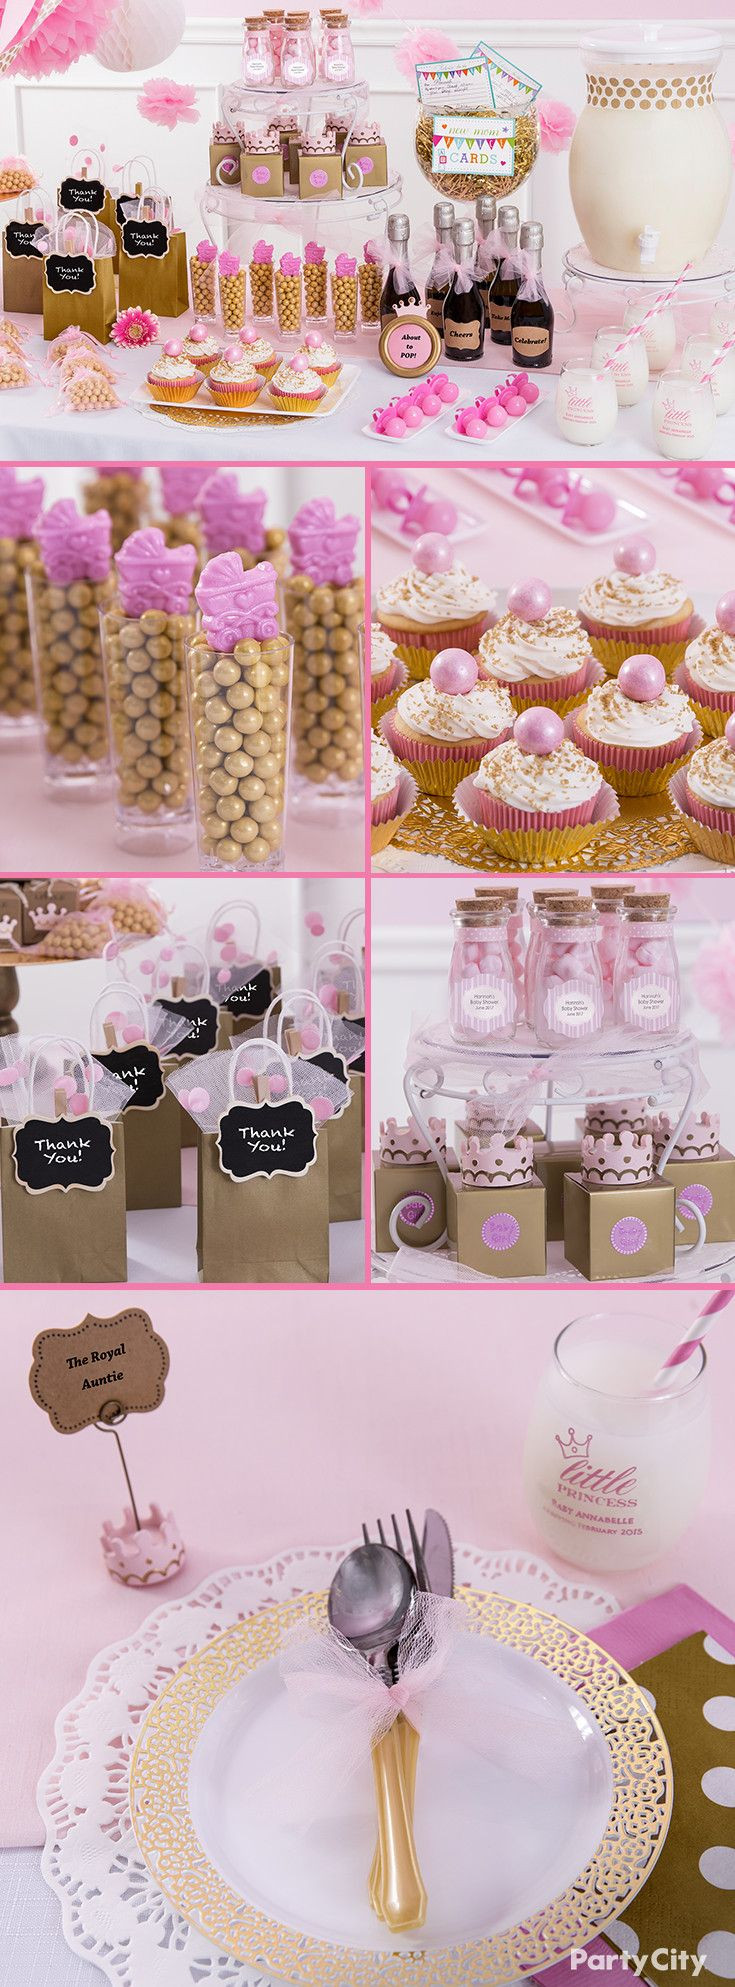 Party City Baby Shower Girl
 115 best images about Baby Shower Ideas on Pinterest